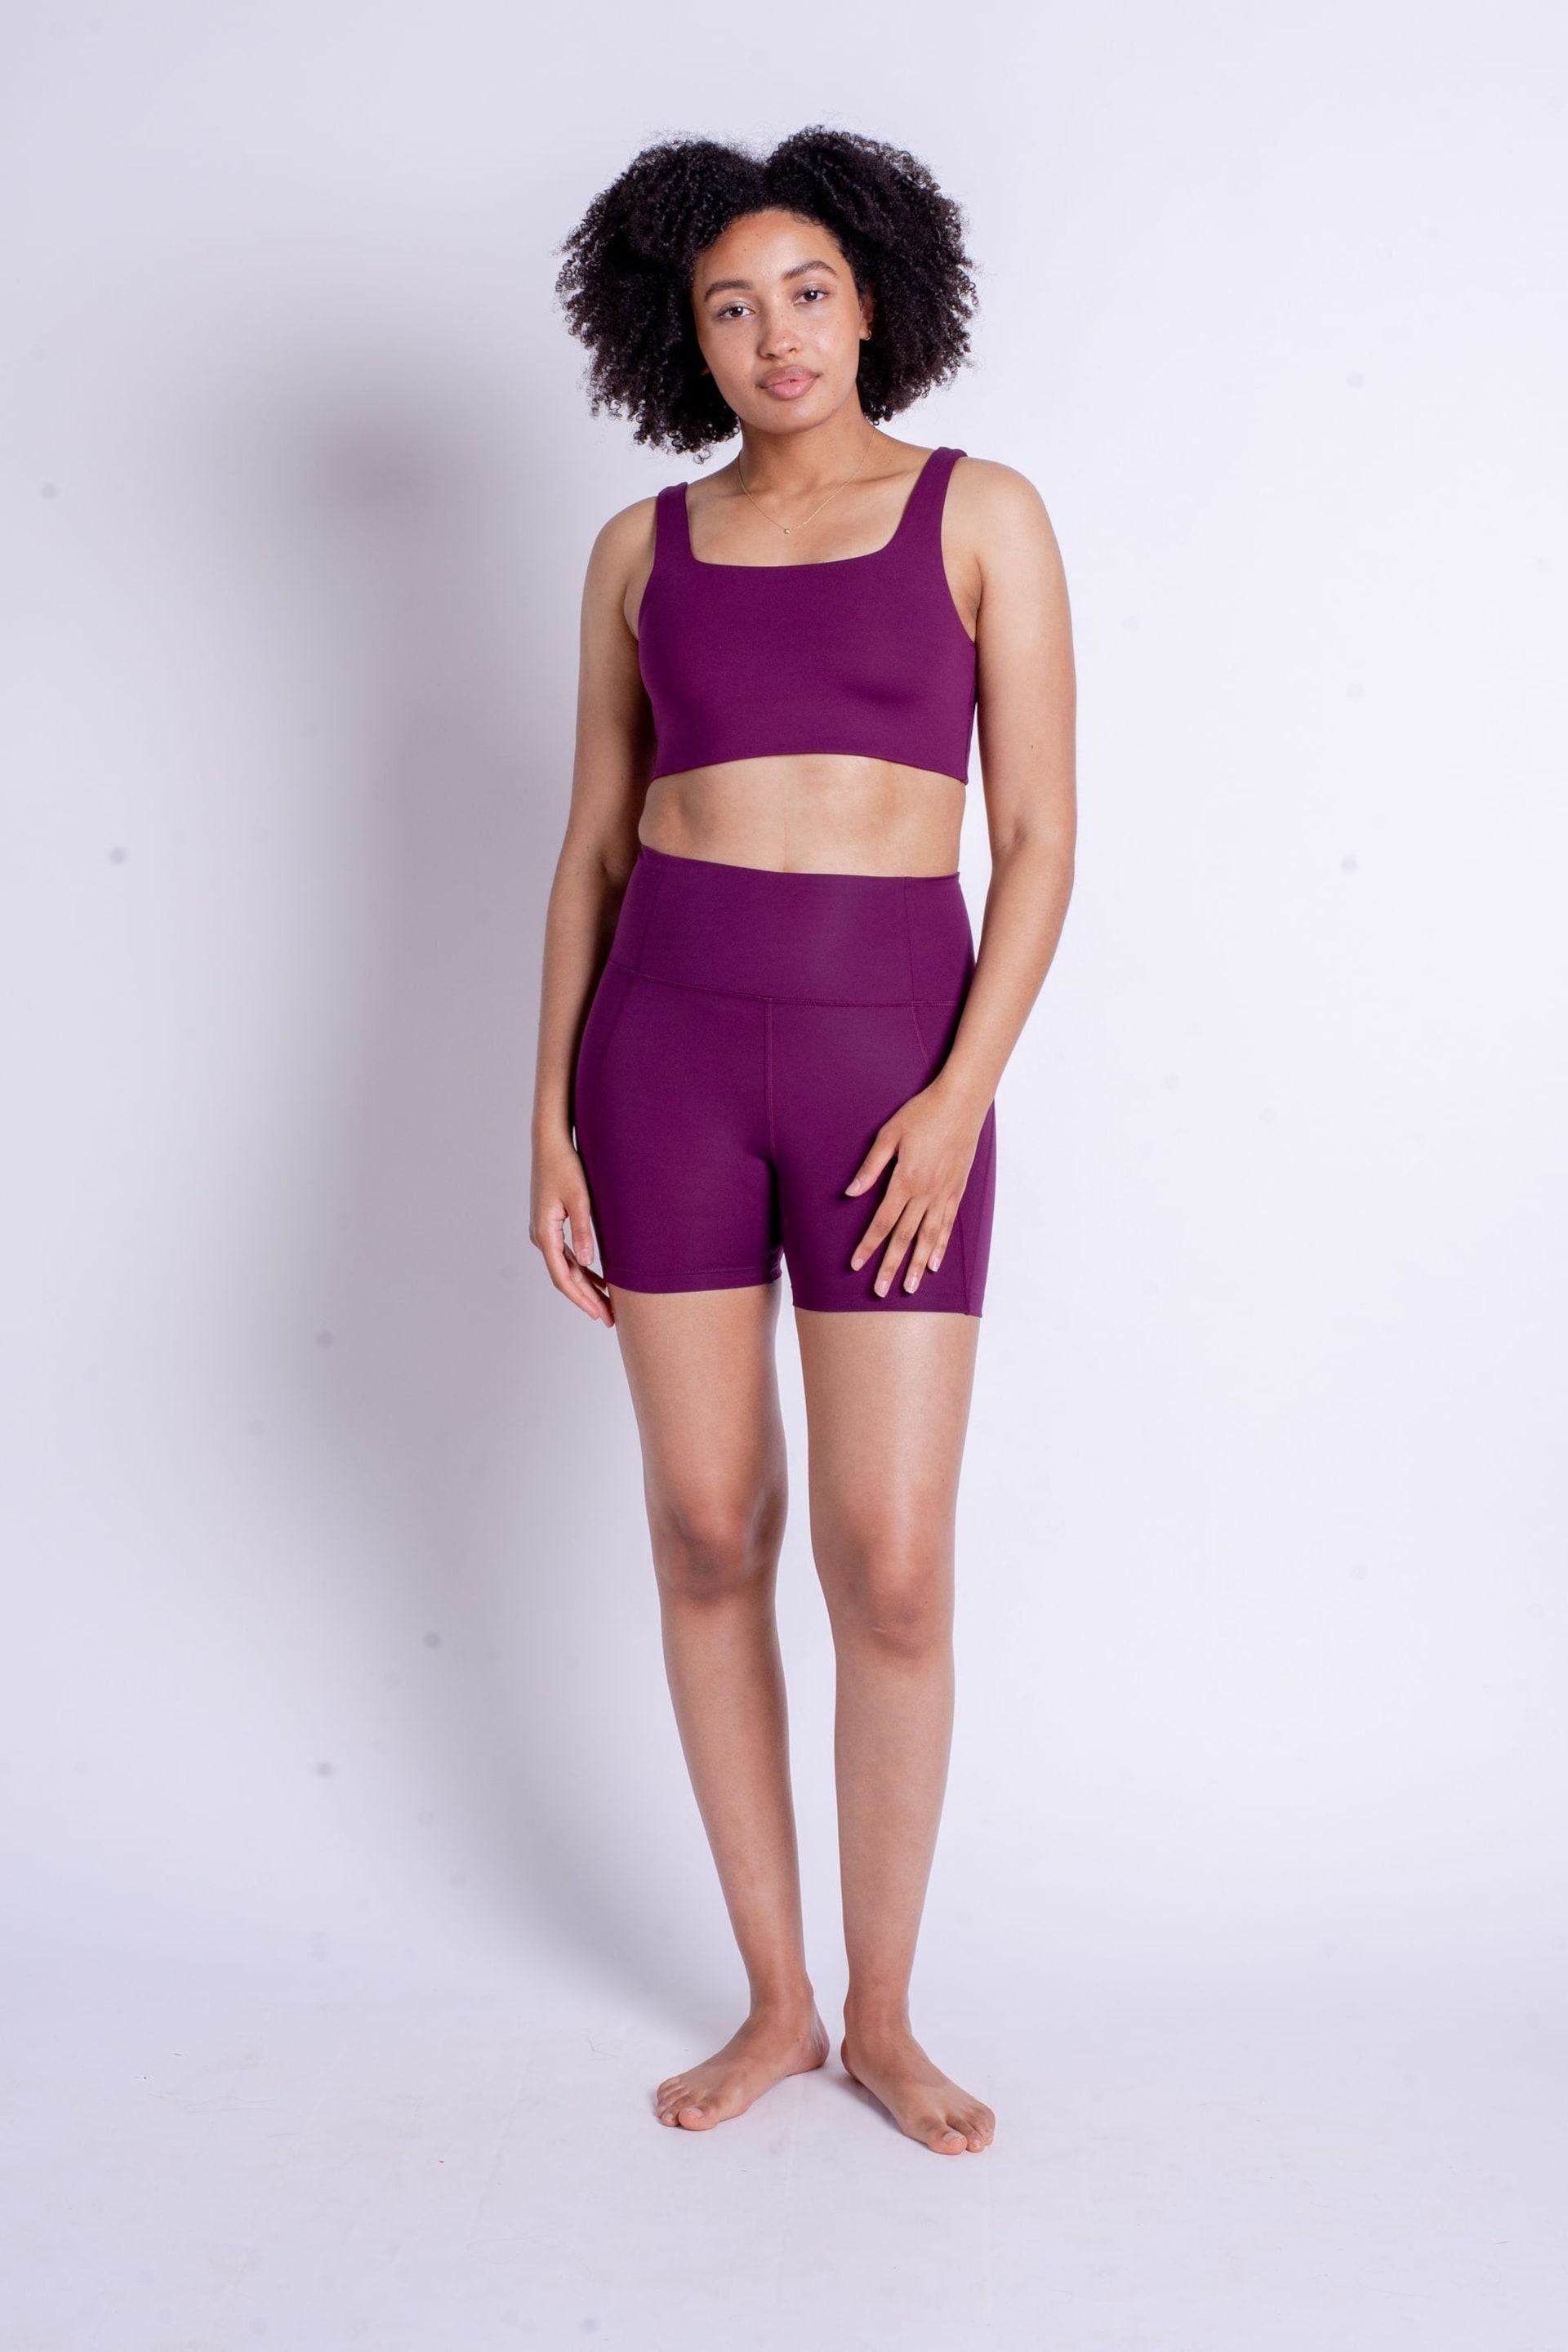 Girlfriend Collective High Rise Run Shorts - Image 4 of 7